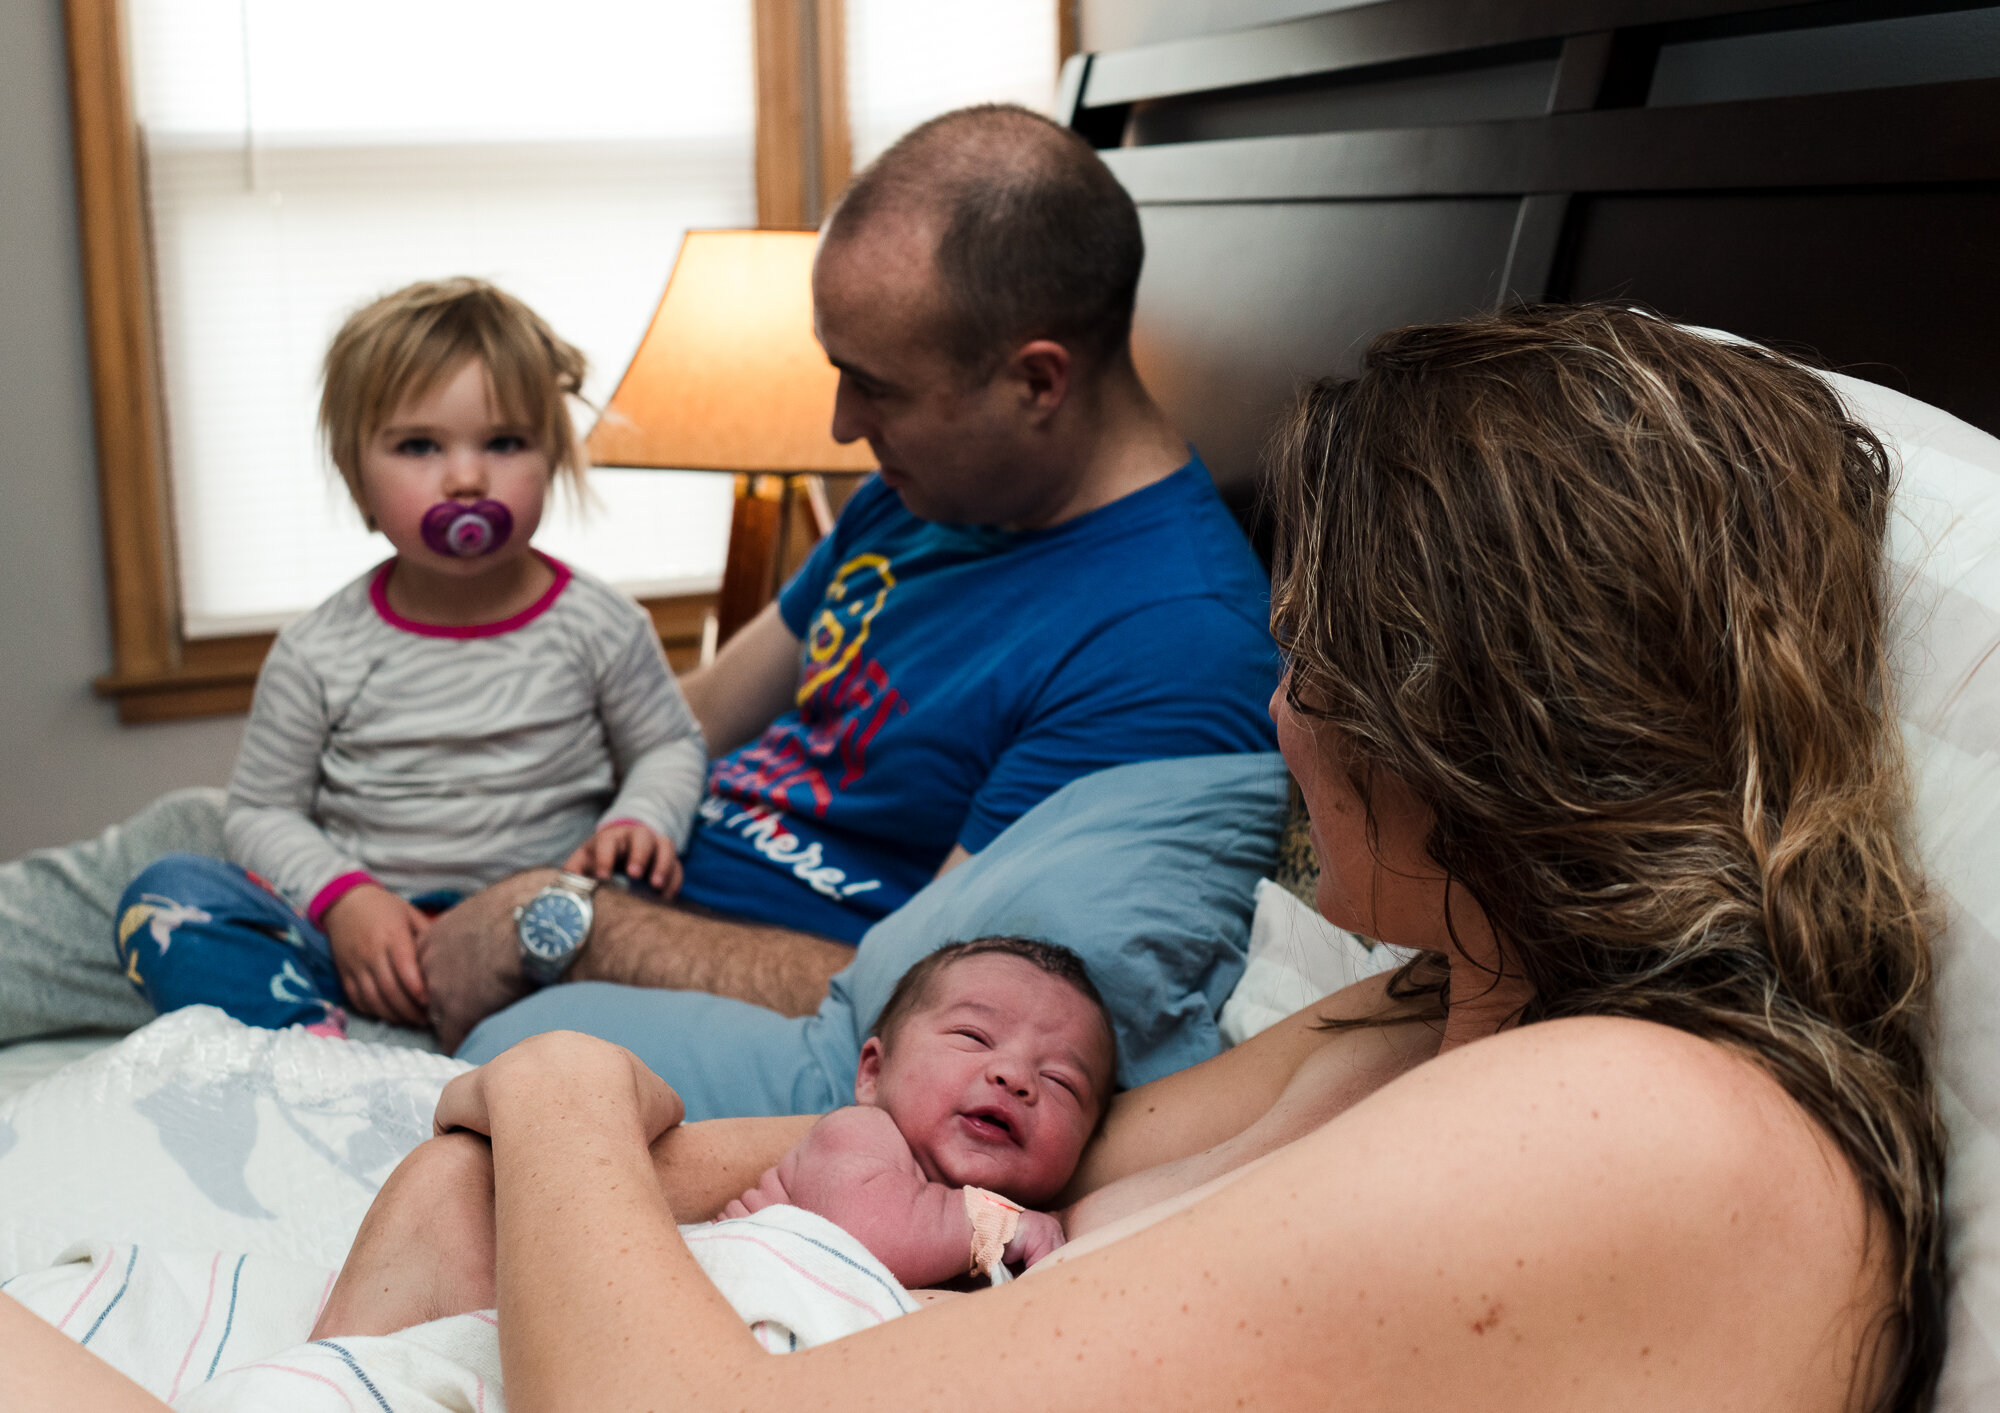 Gather Birth Cooperative- Doula Support and Birth Photography in Minneapolis - April 15, 2020 - 154851.jpg